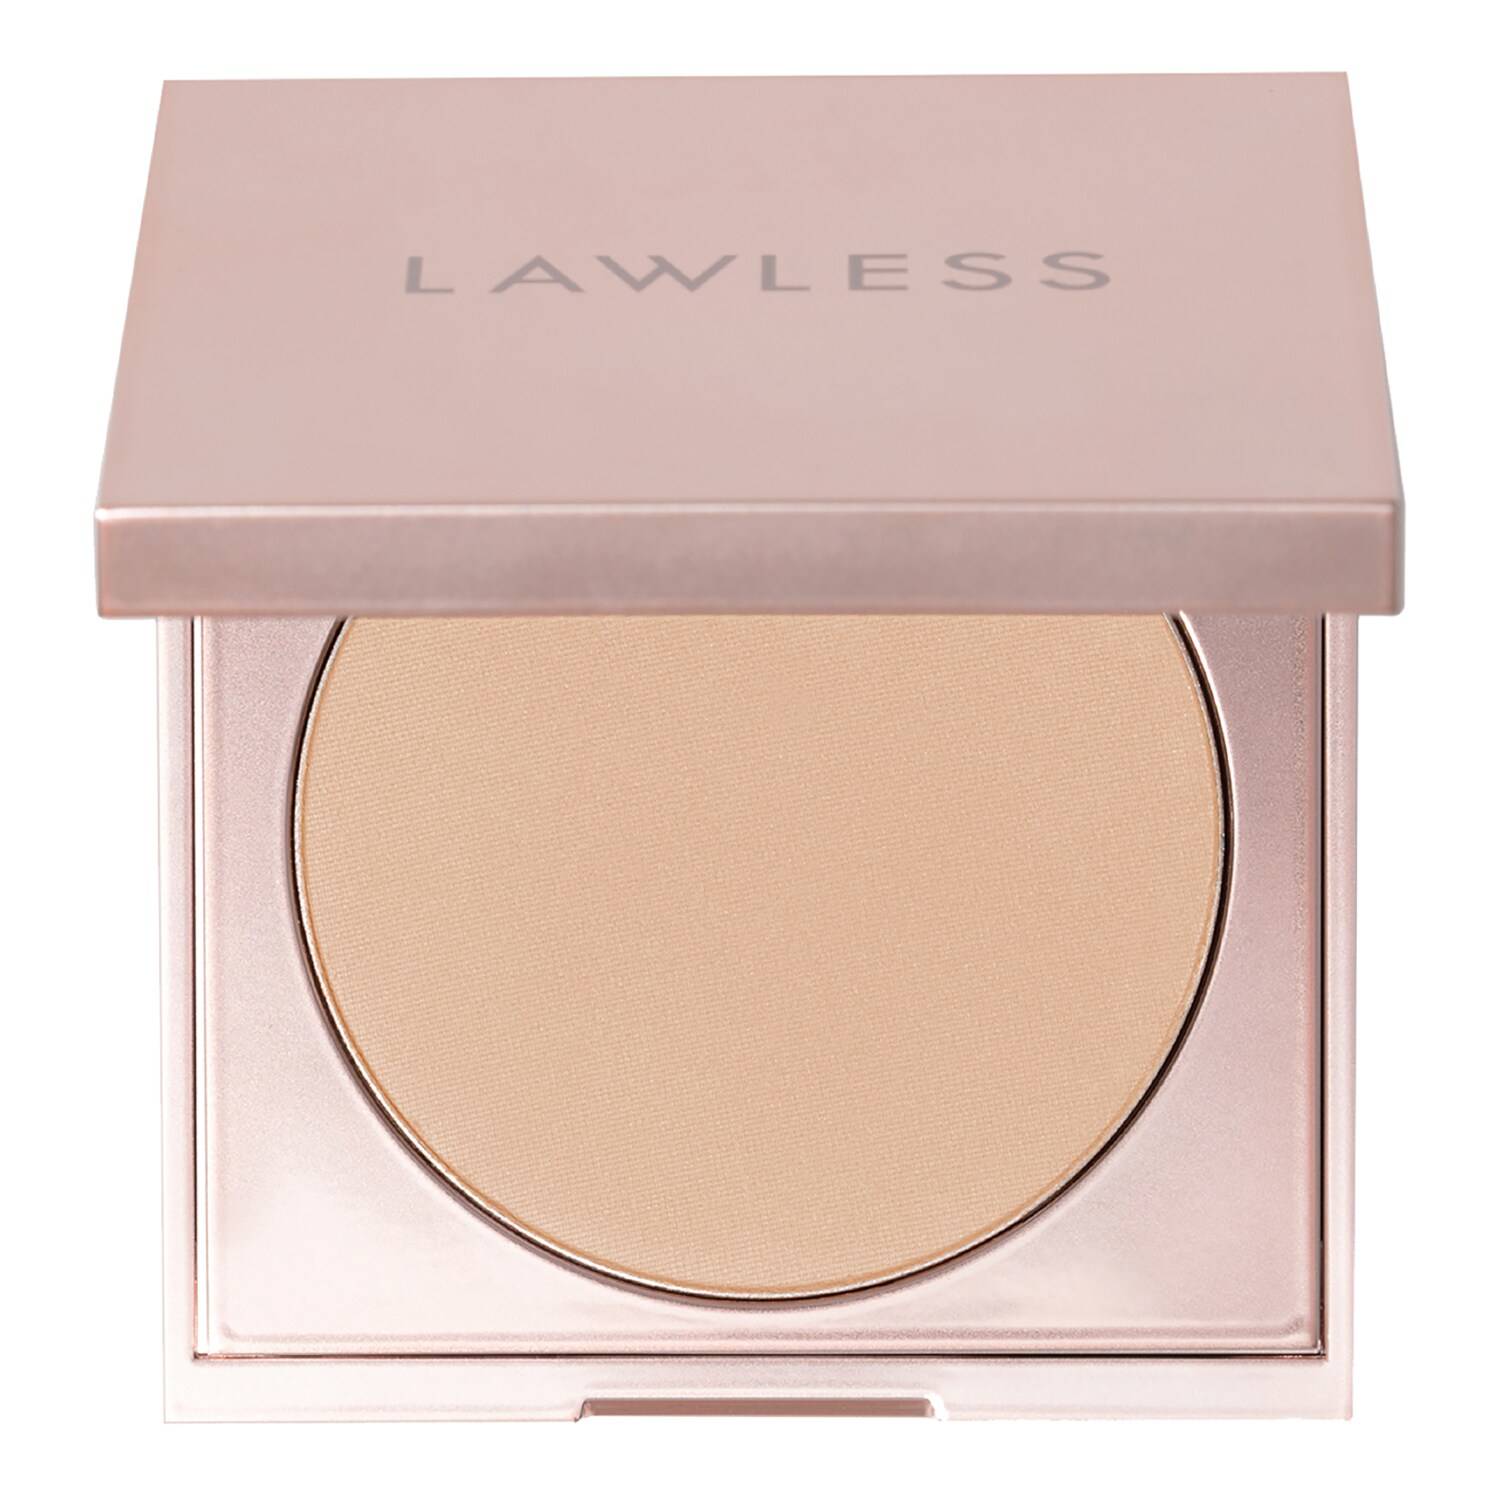 Lawless Beauty Skin-Smoothing Talc Free Perfecting Powder 9.1G Light